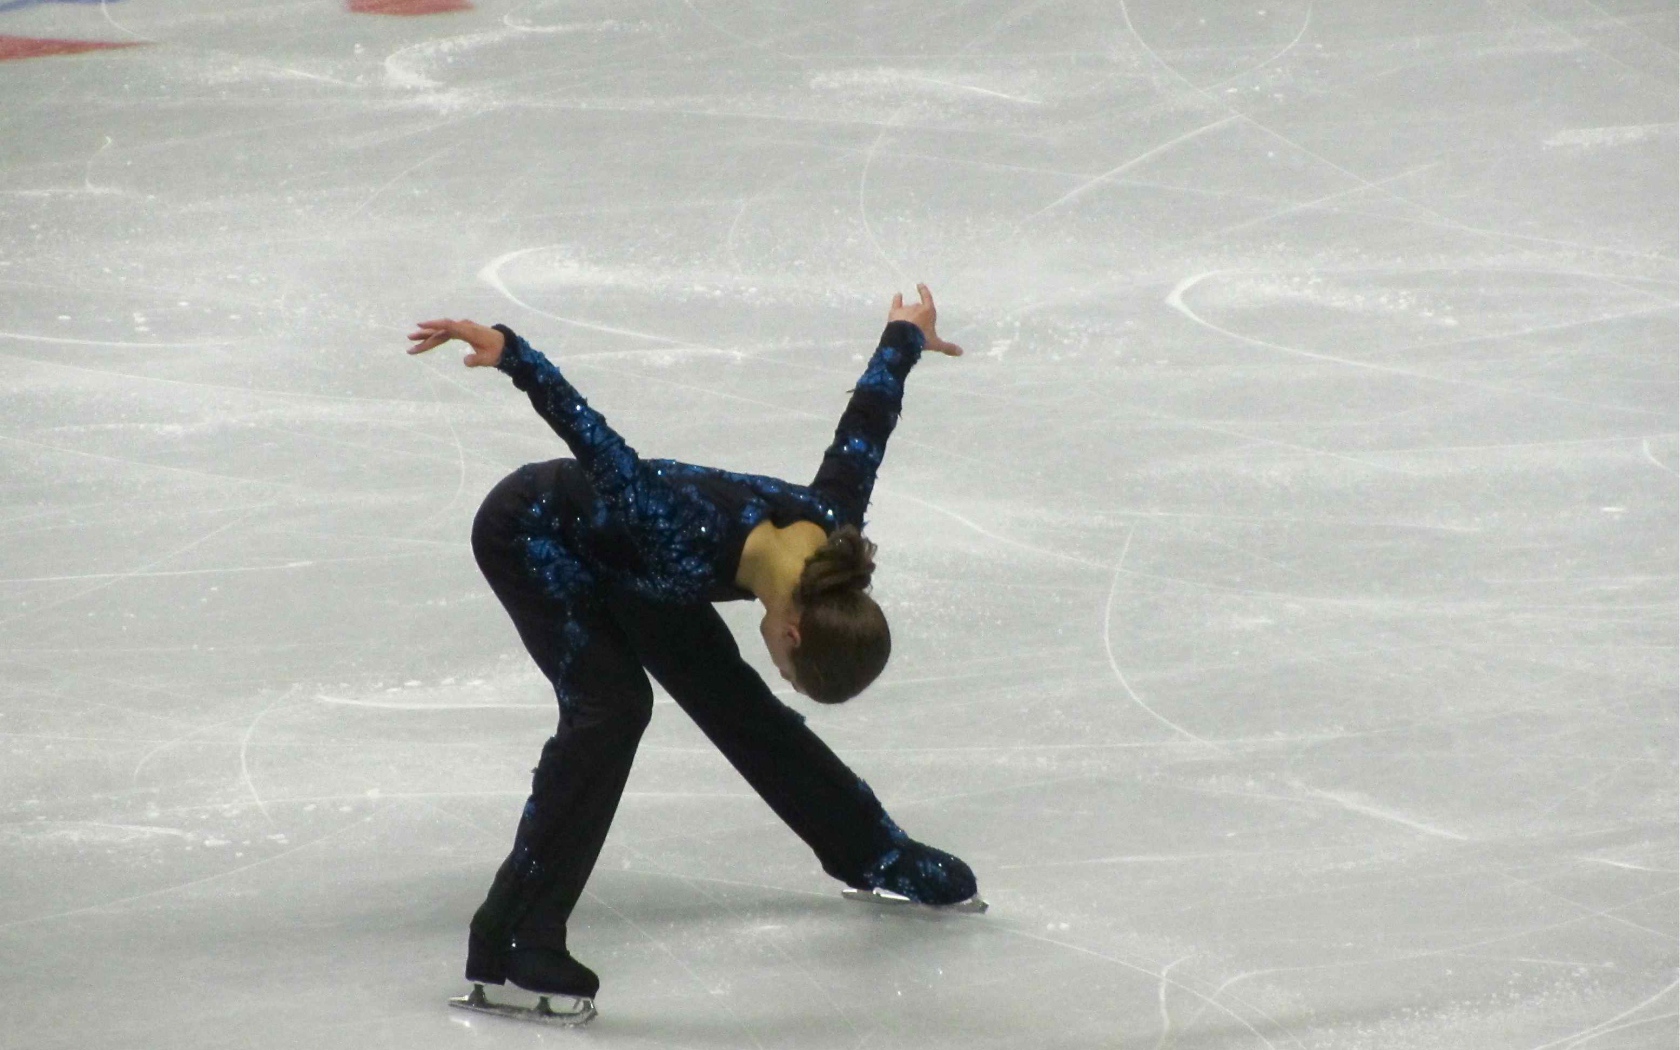 Bronze medalist figure skater Jason Brown at the Olympics in Sochi